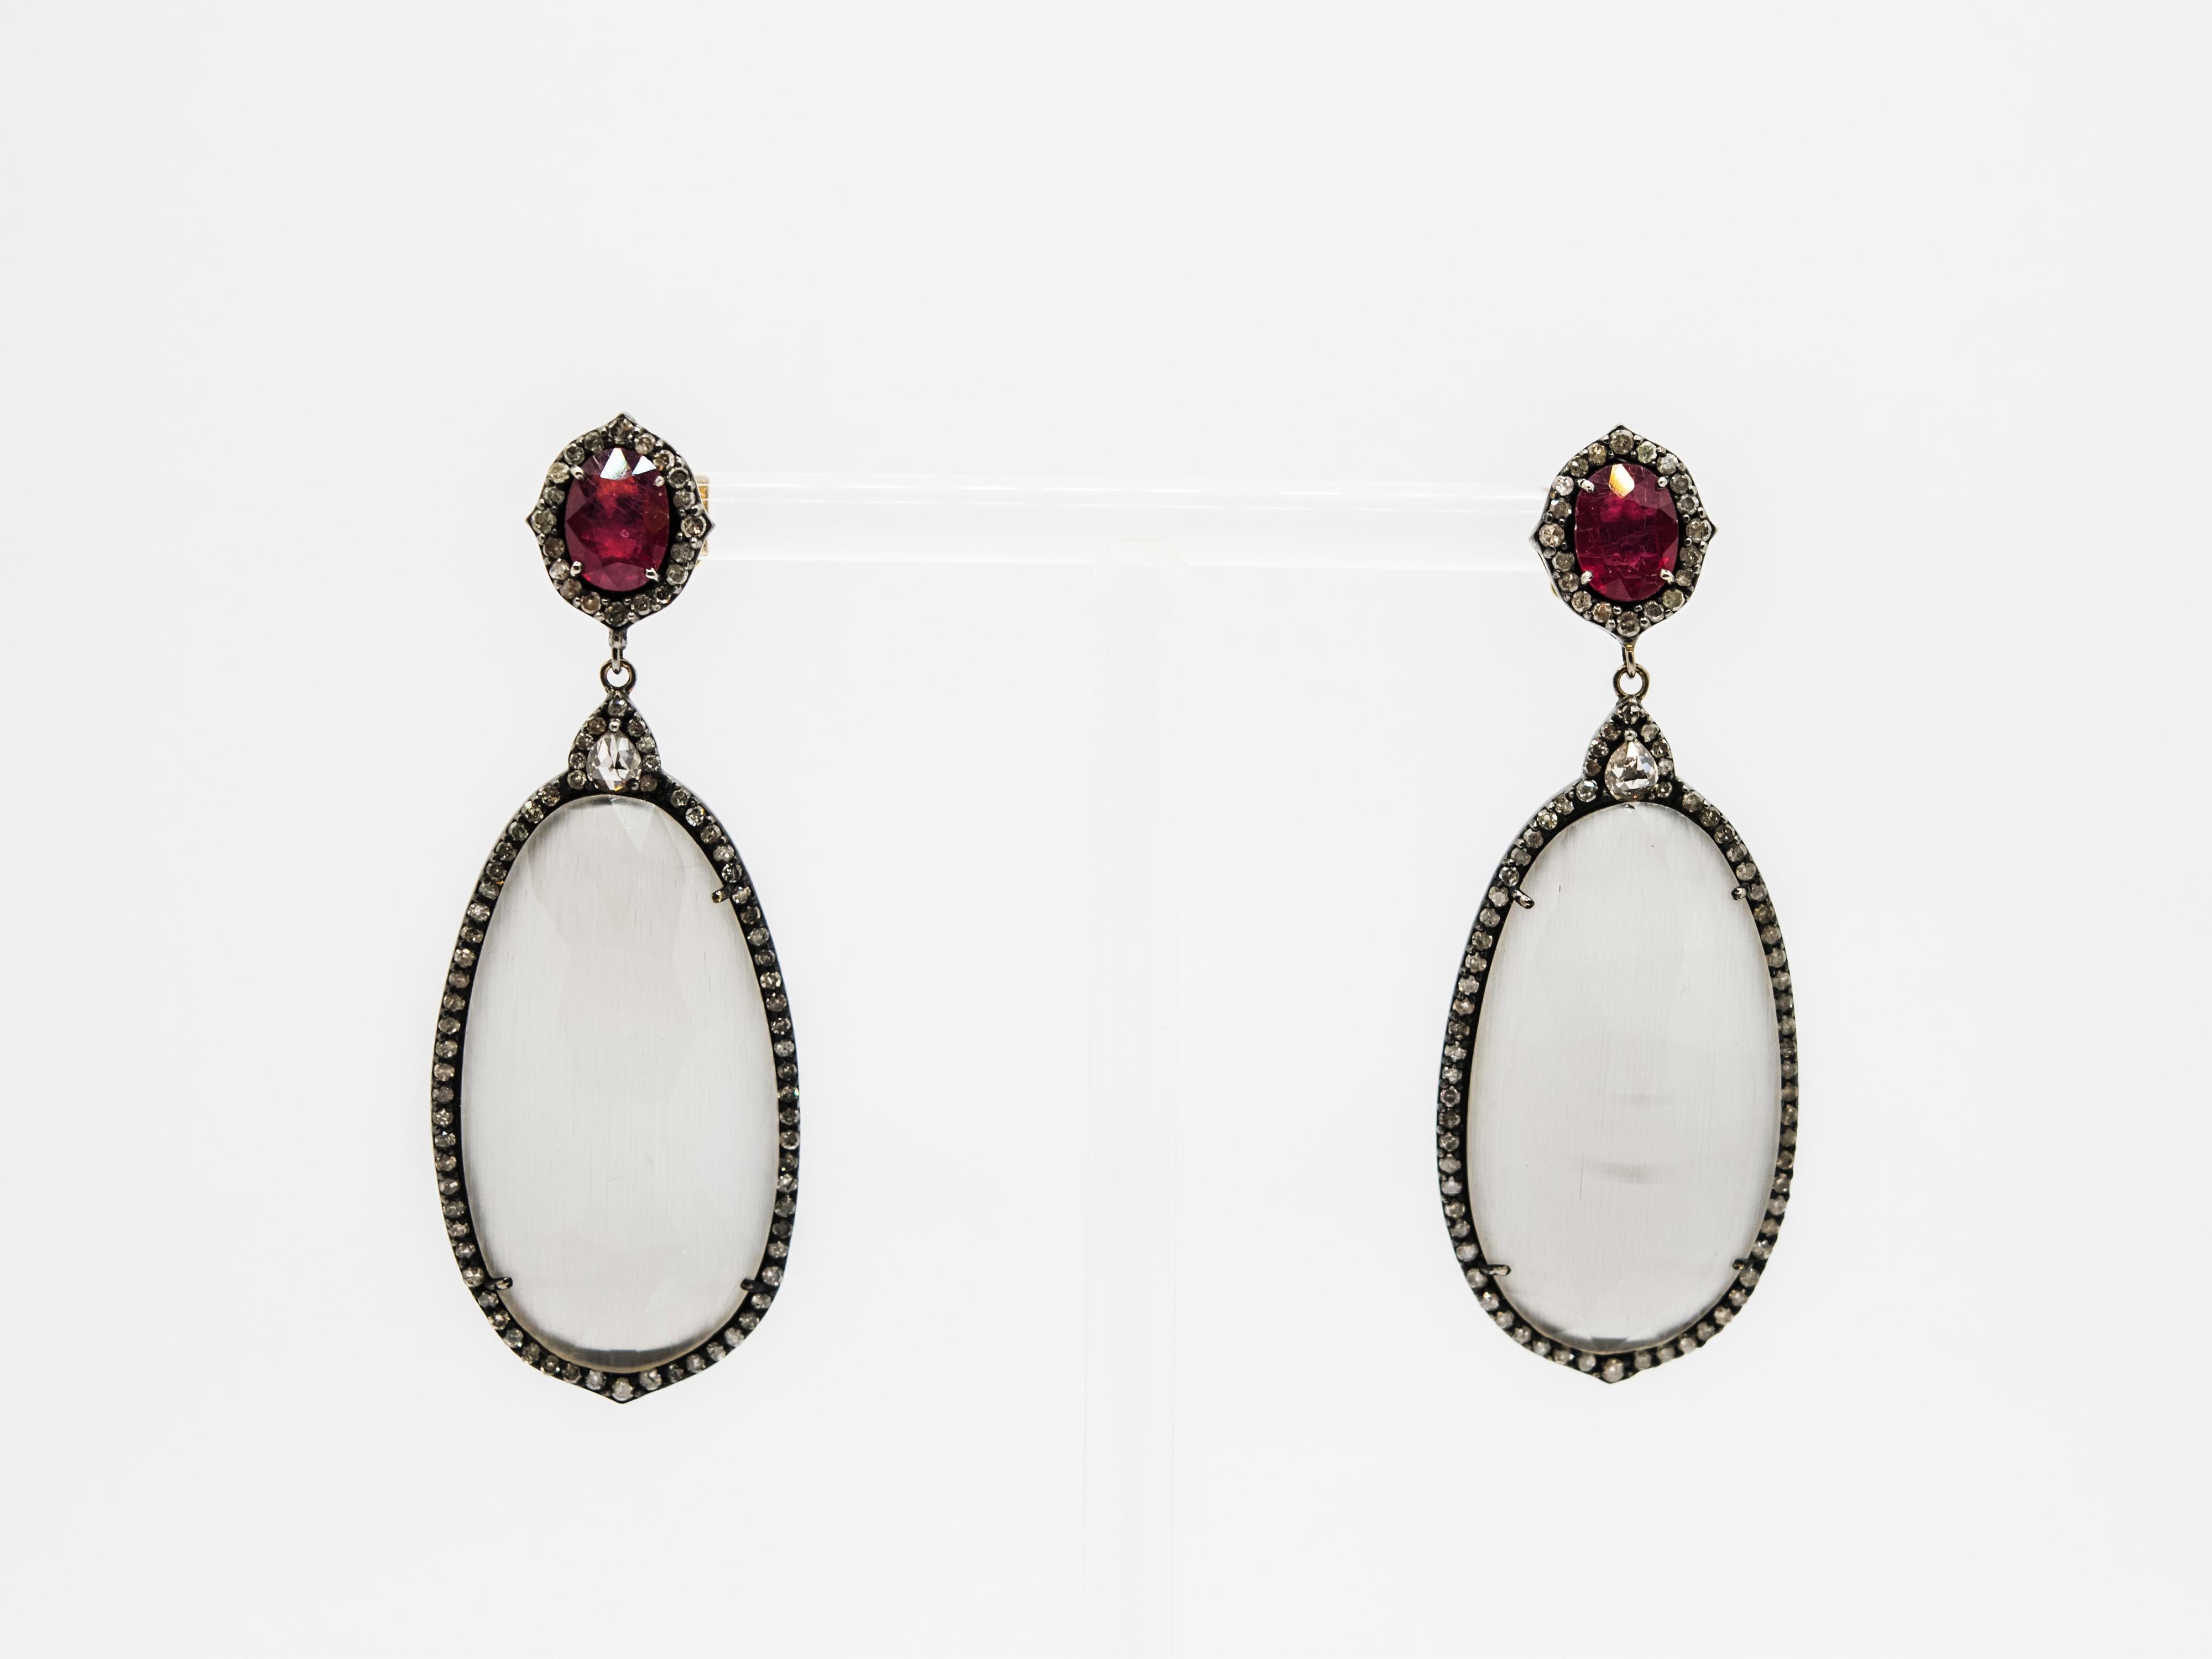 These elegant retro inspired dangle earrings have a burnished silver frame and 18kt yellow gold closure.
Both faceted grey Agate and oval cut Rubies are surrounded by icy gray Diamonds.
A drop cut brown Diamond enhances the center of this beautiful